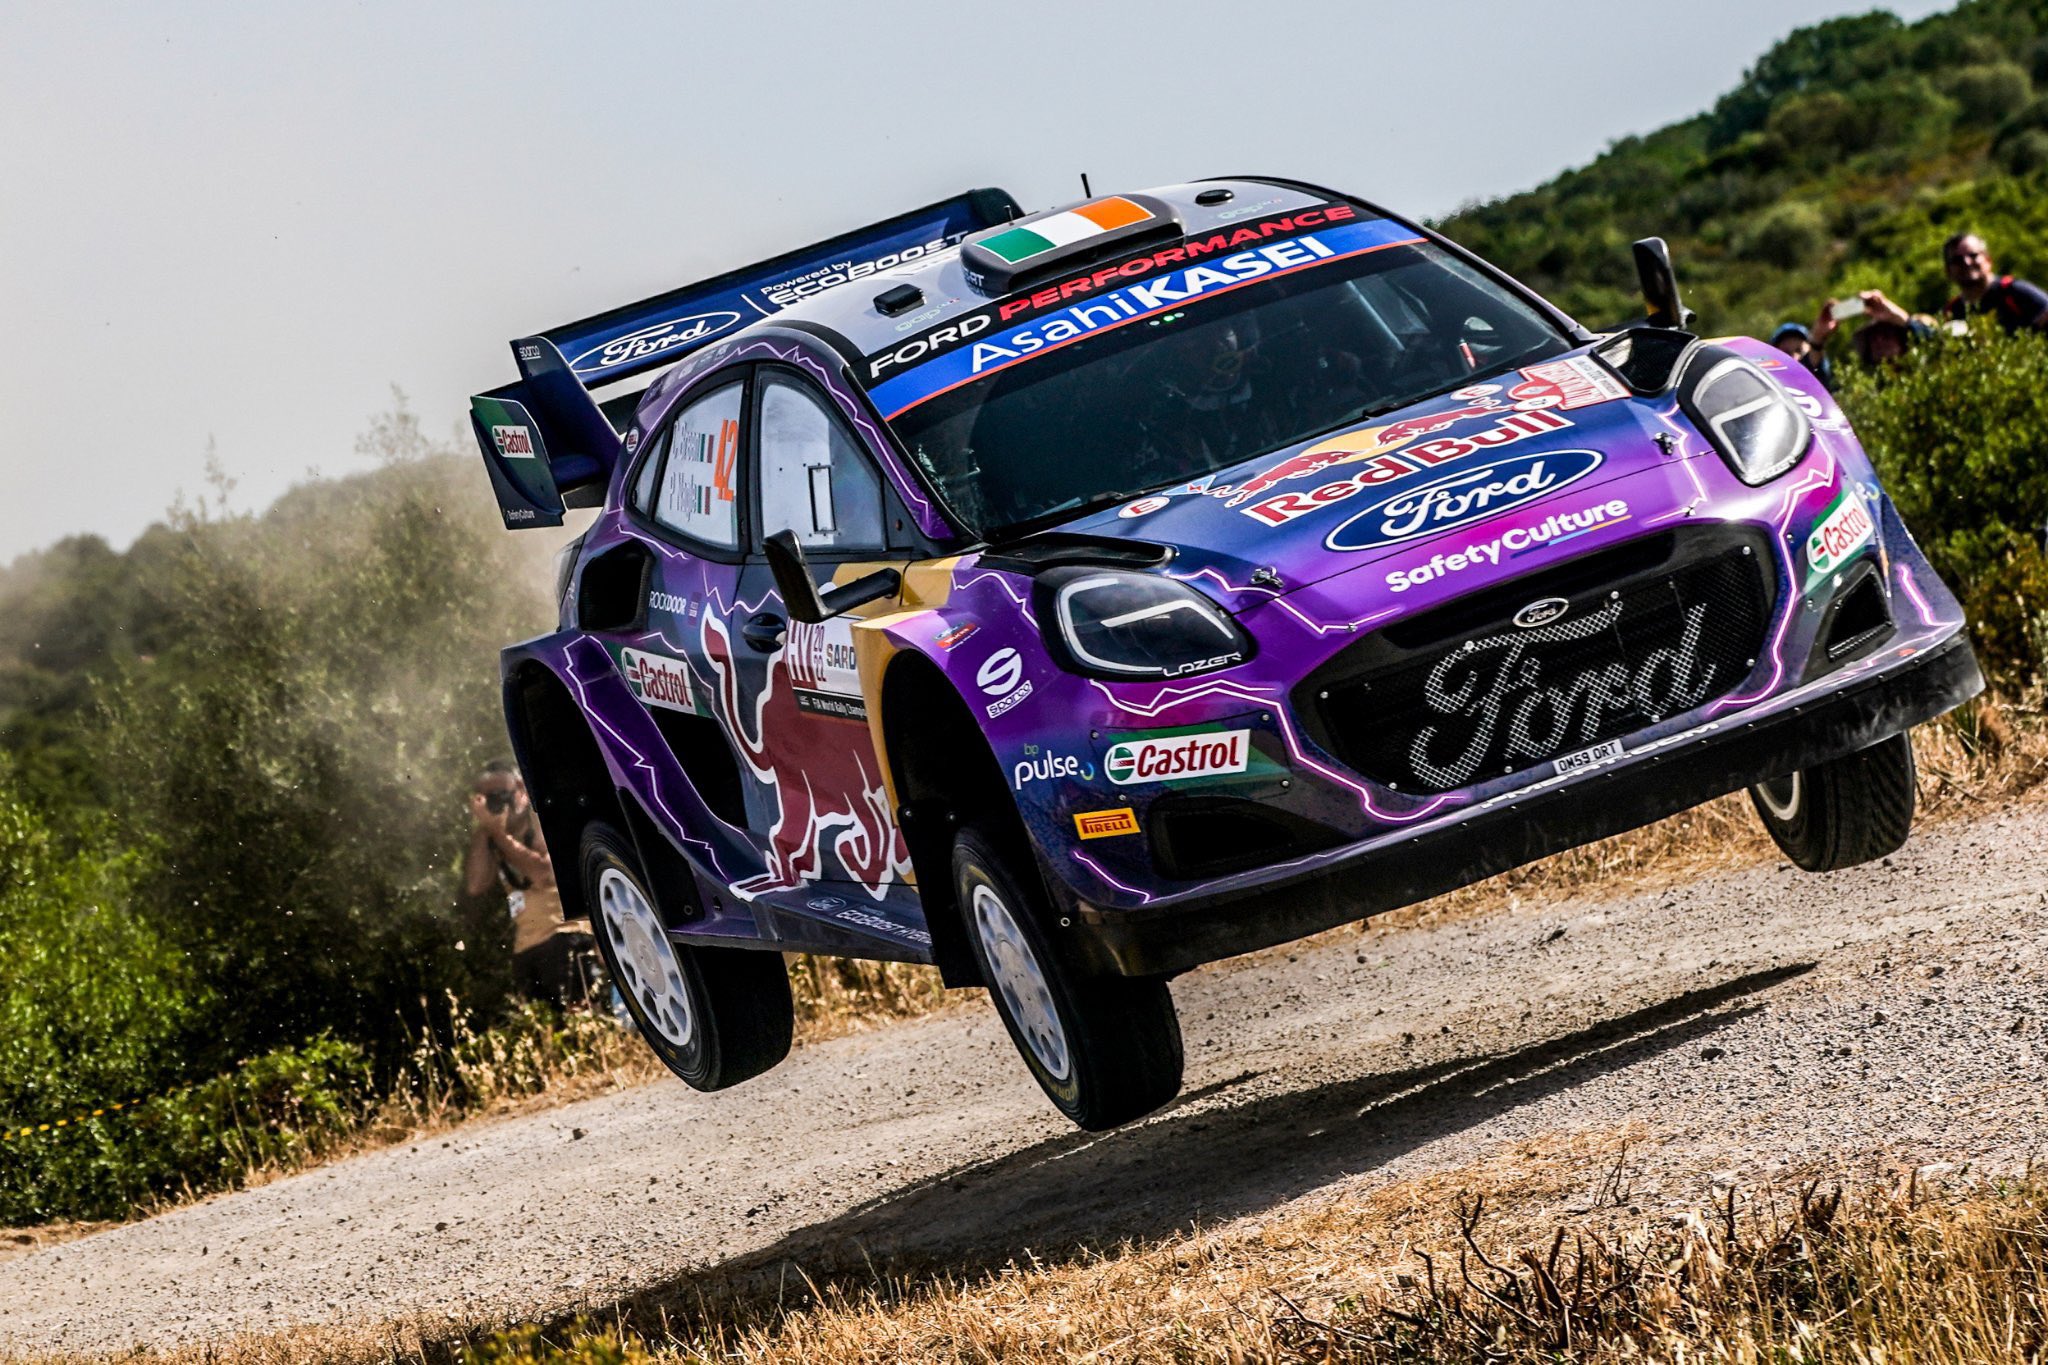 Craig Breen on Twitter: "It's great to be back in the Puma Rally1 so quick  after #RallydePortugal. We had a really good shakedown of  #RallyItaliaSardegna, the feeling is good heading into the